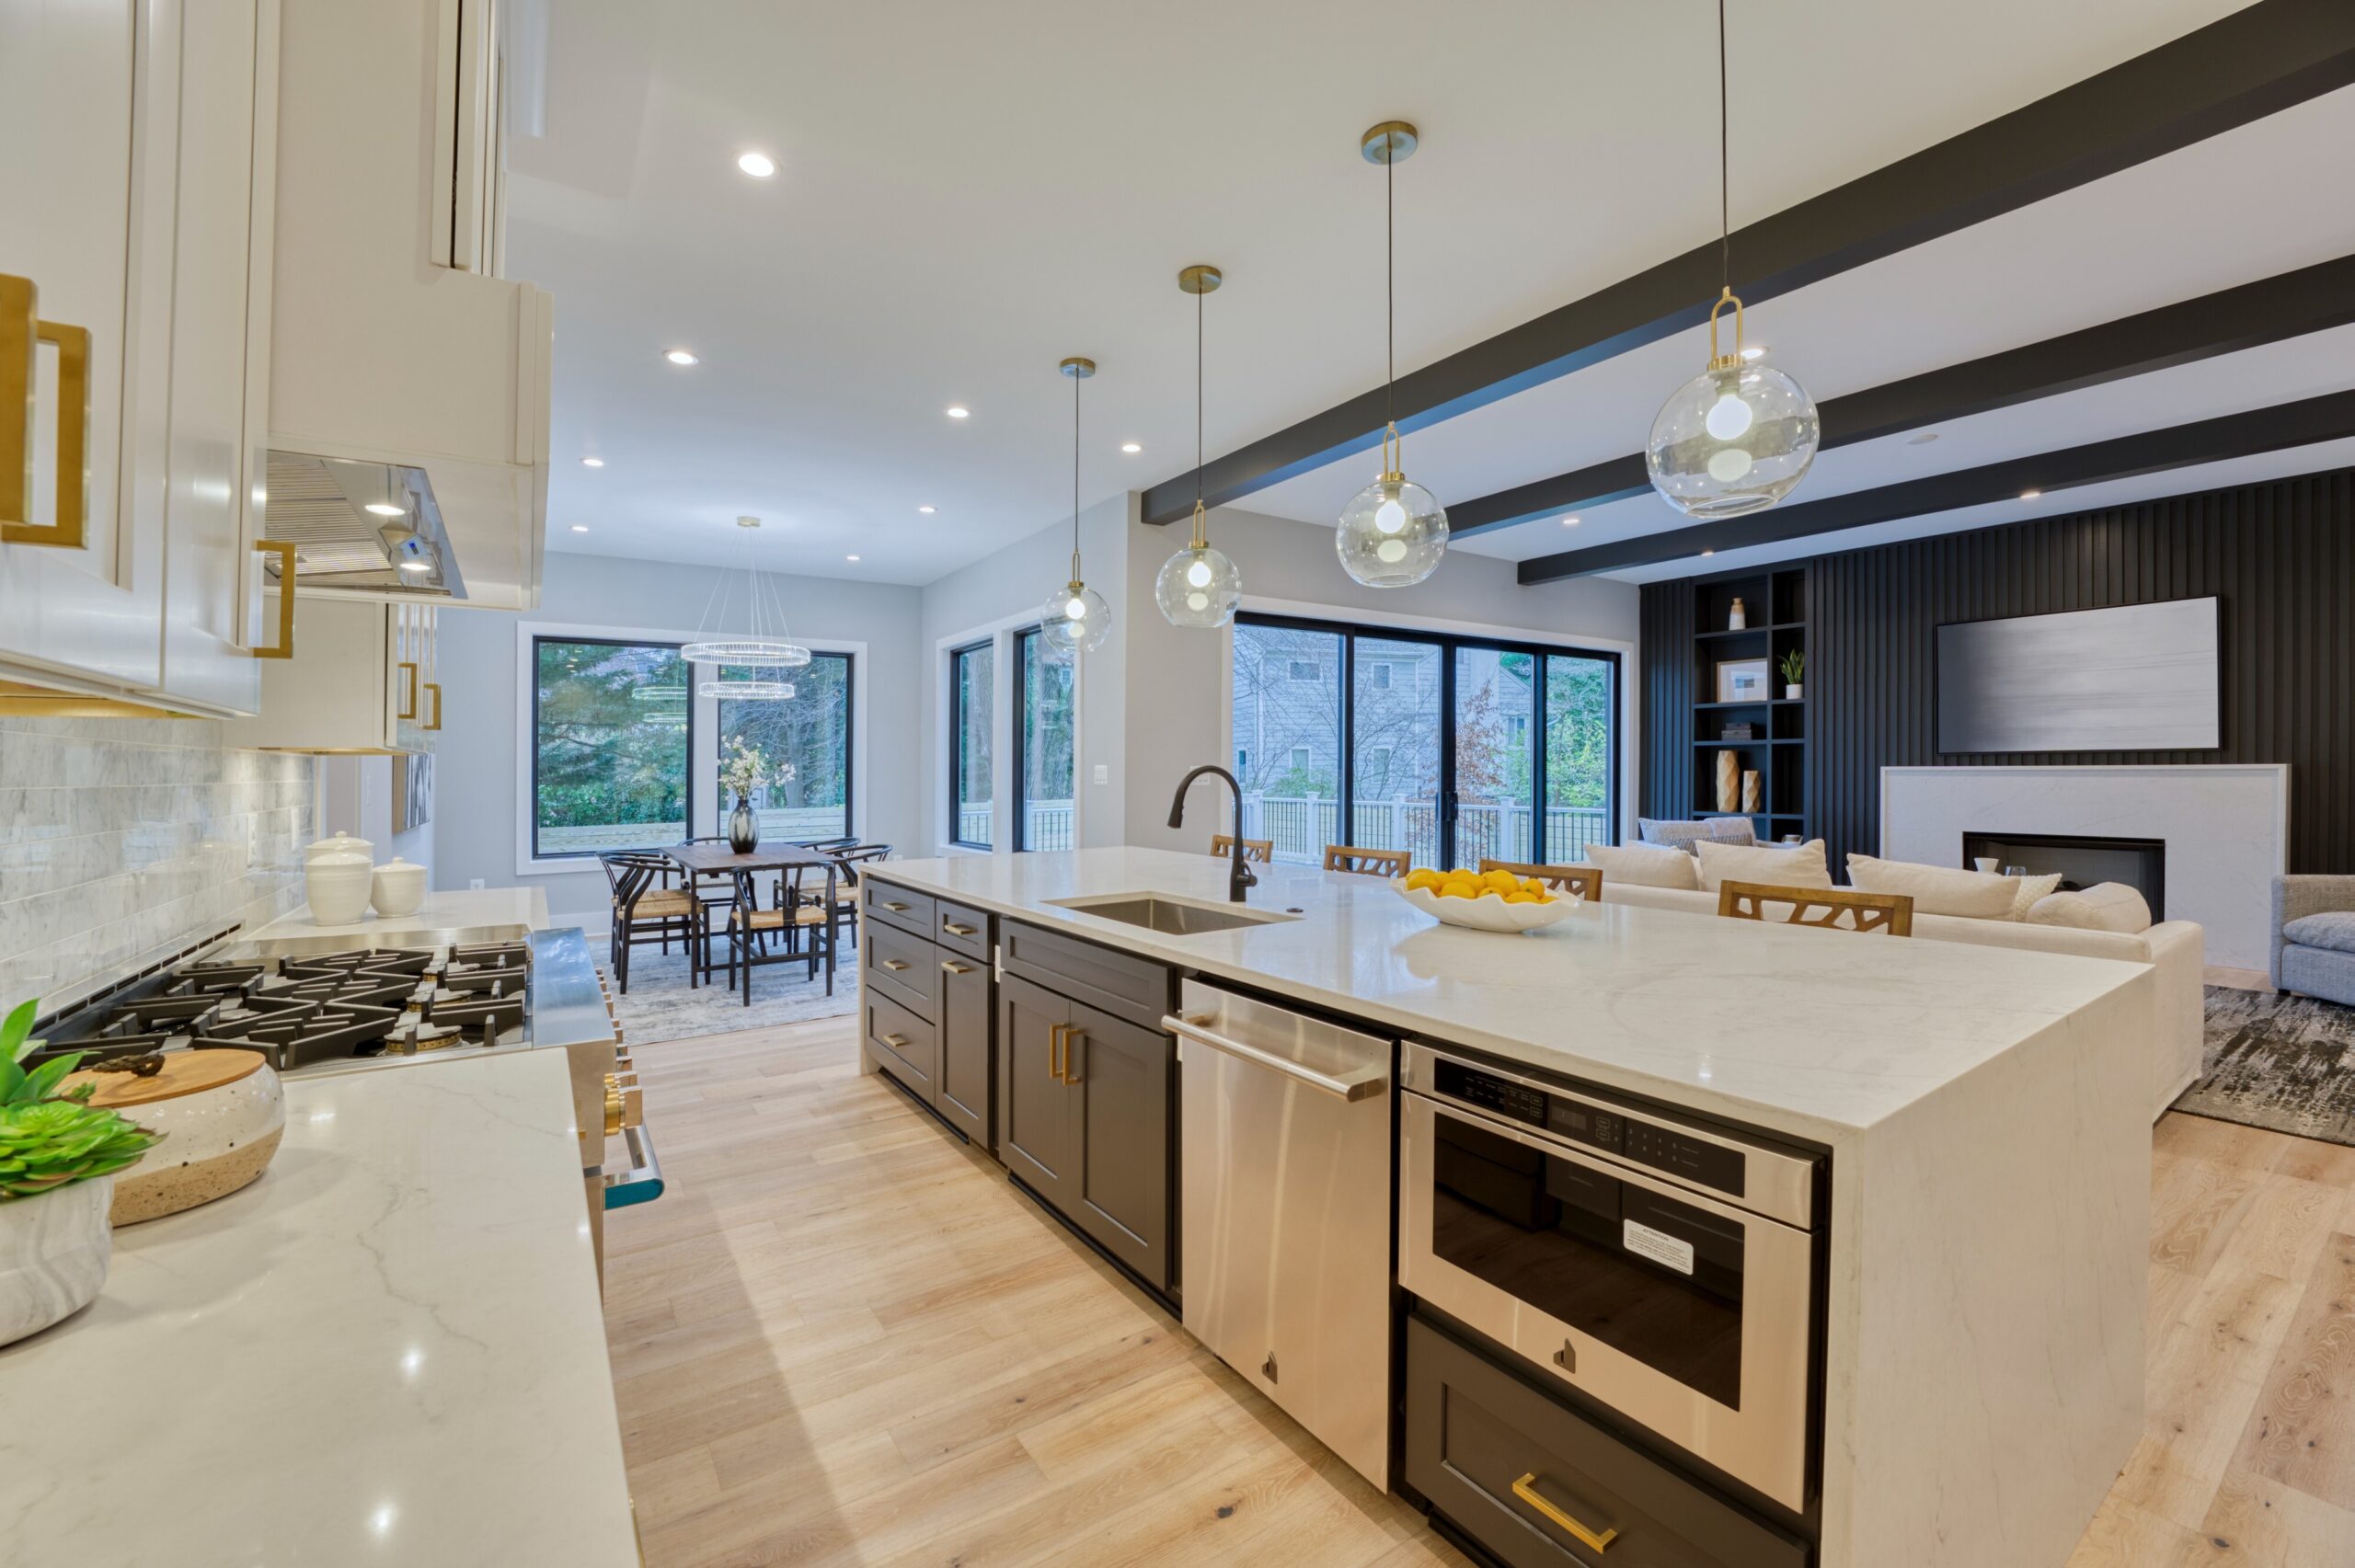 Professional interior photo of new construction home at 3400 N Ohio St - showing the white kitchen with black and gold accents. Large island and high end appliances